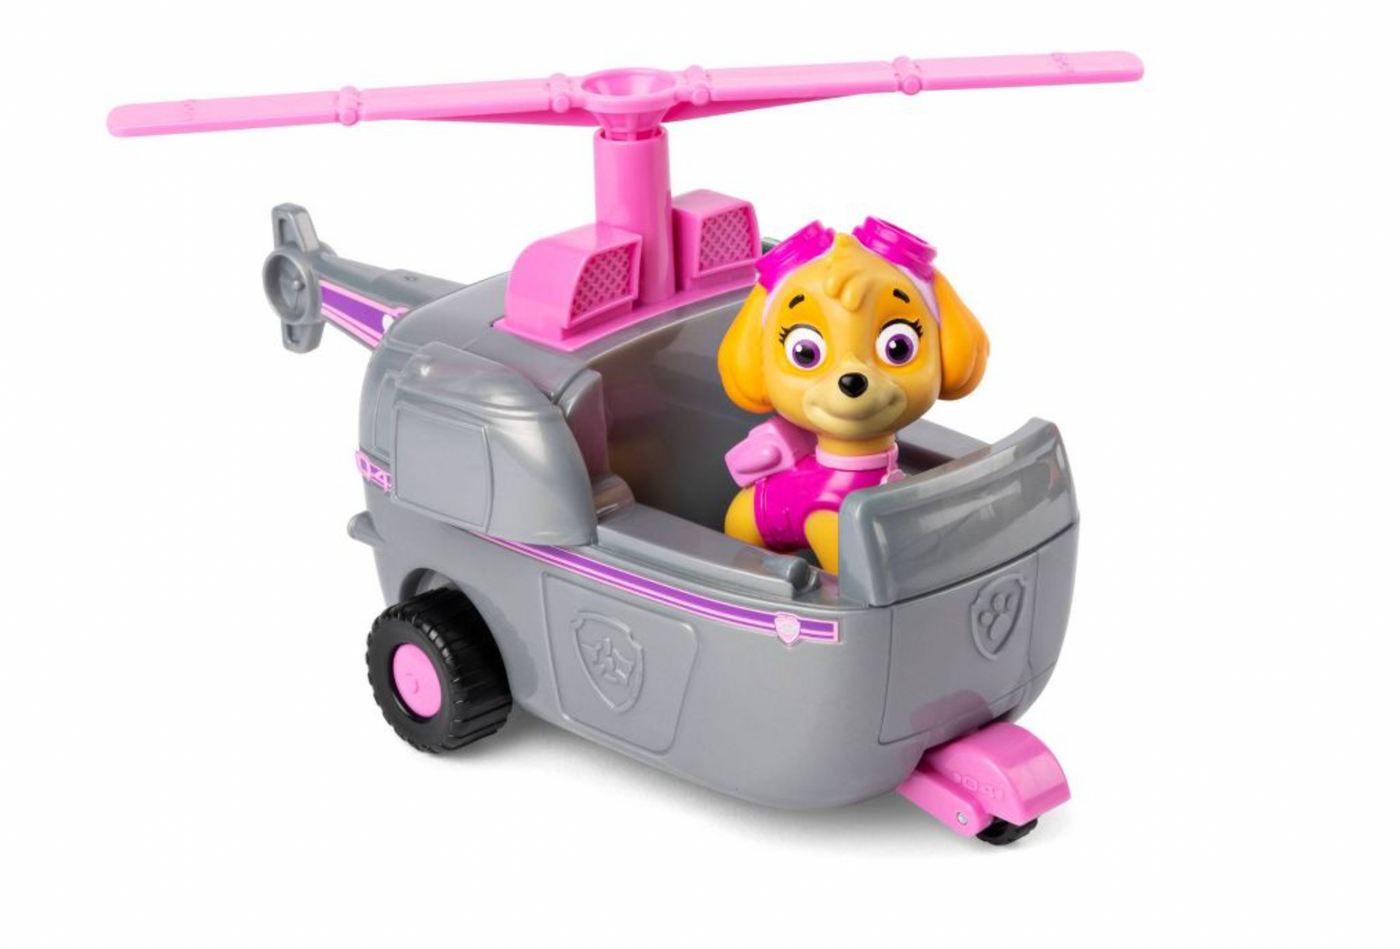 PAW Patrol Helicopter Vehicle Skye Toy Set New with Box